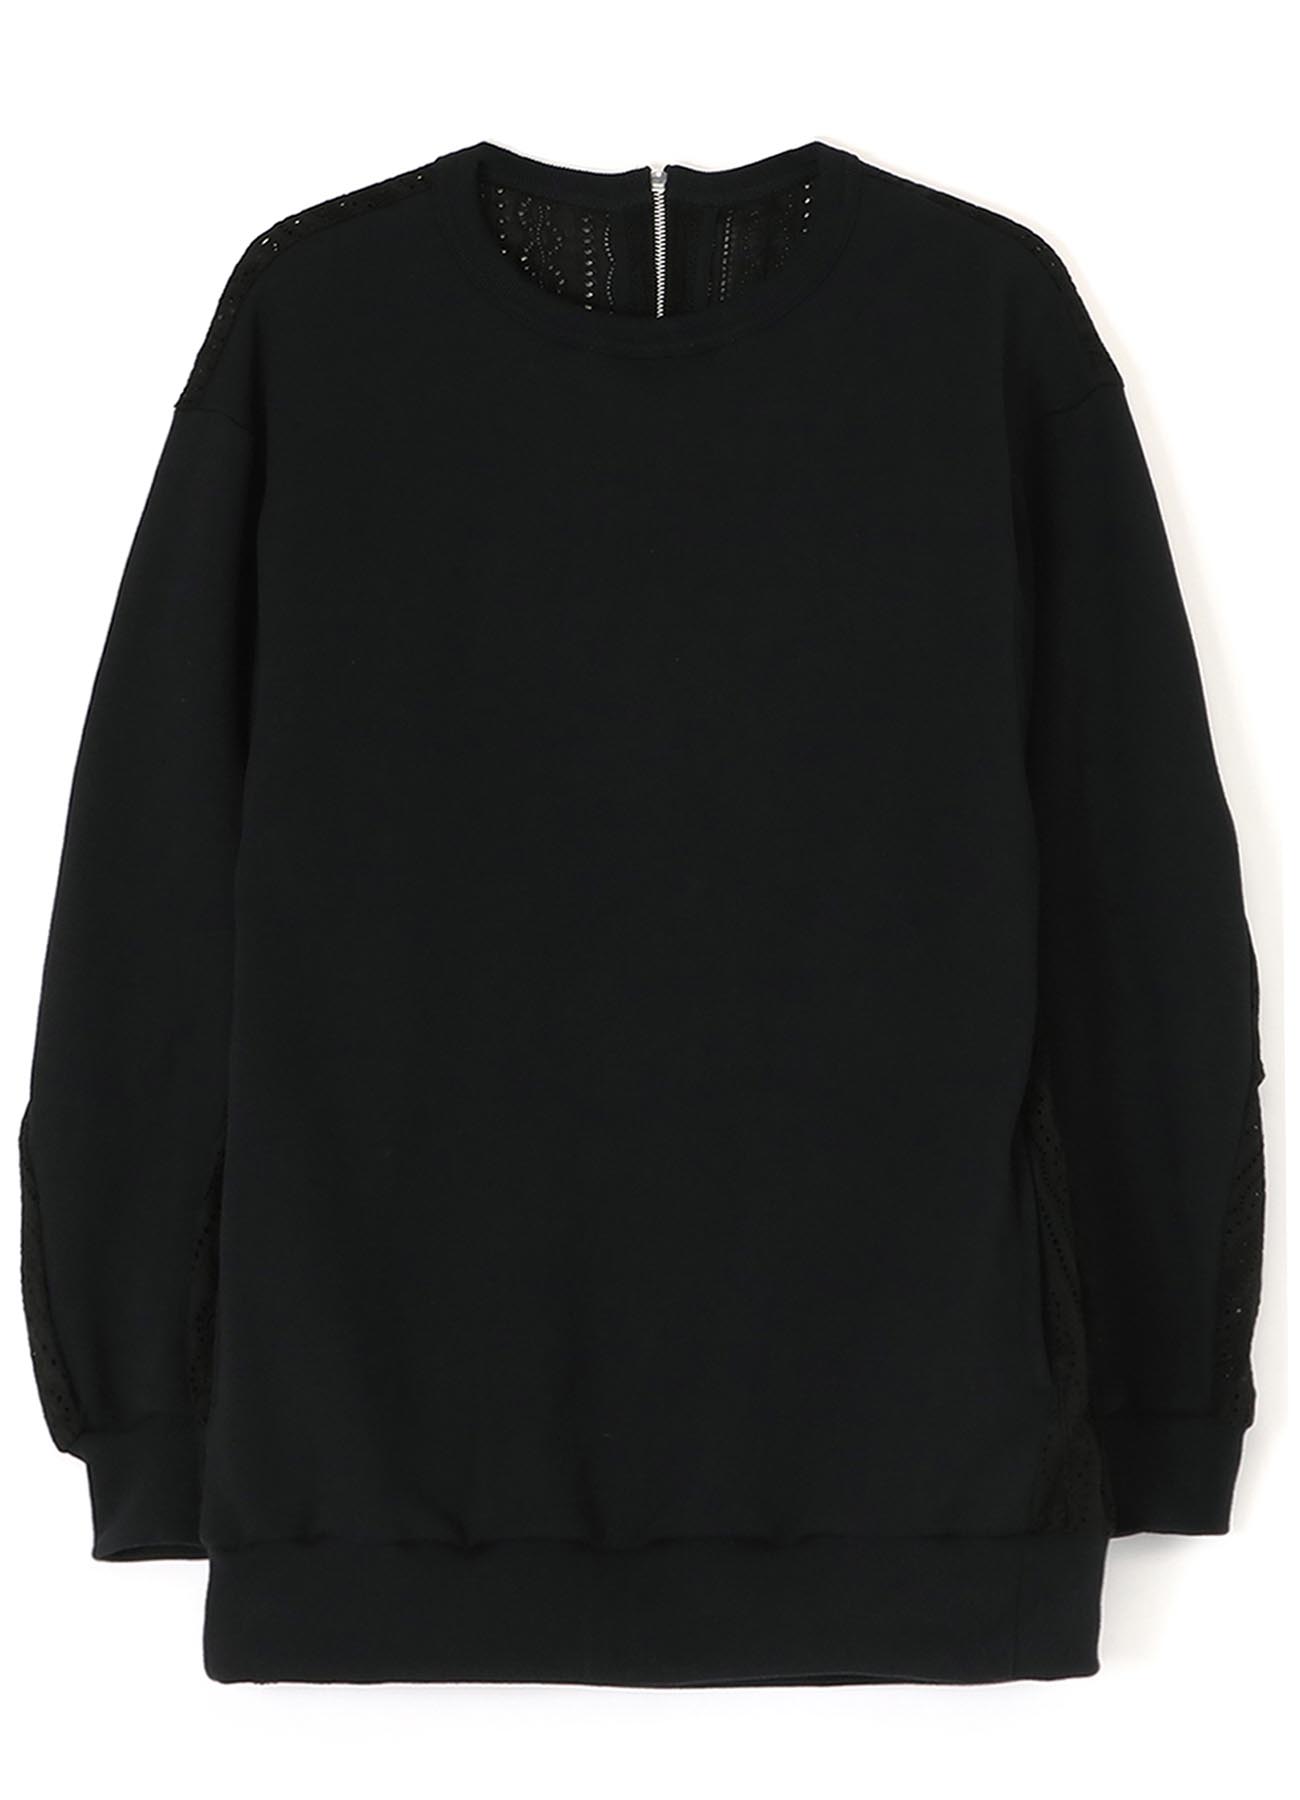 REGULATION PULLOVER WITH BACK ZIPPER